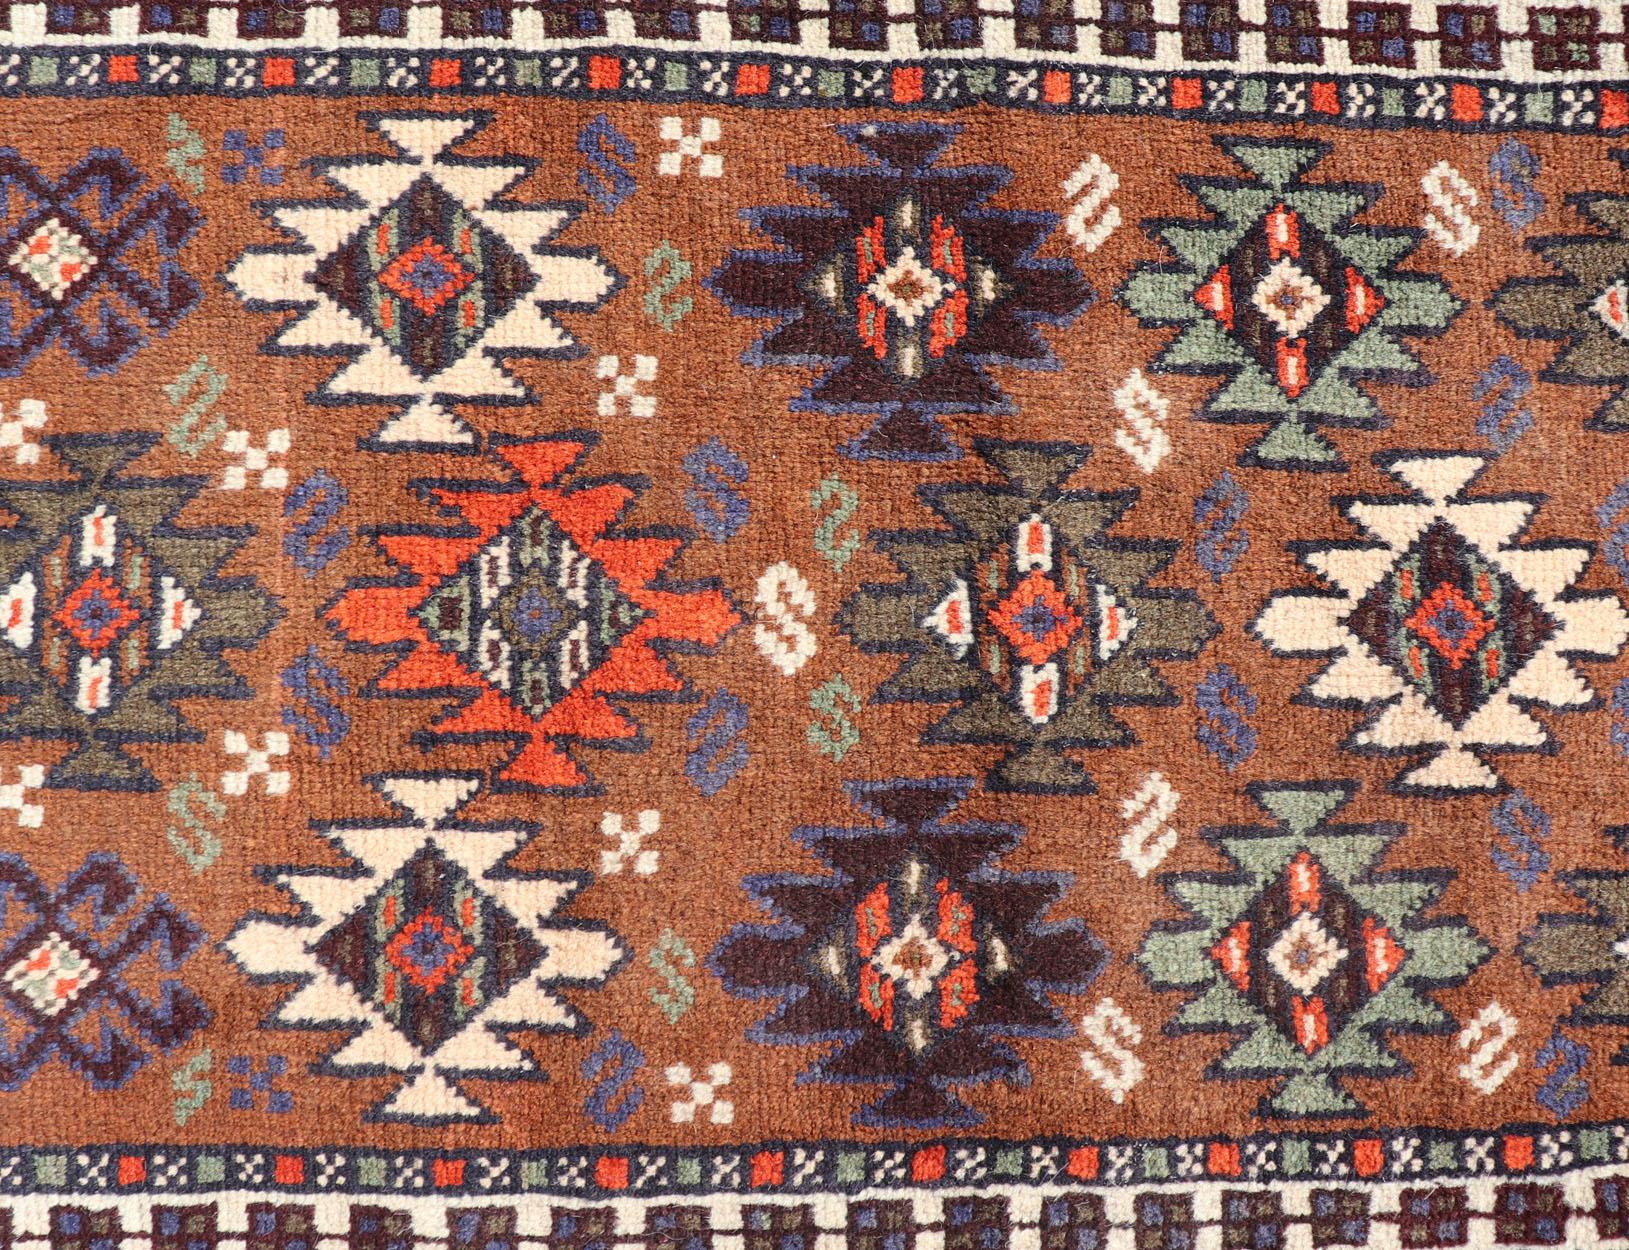 Vintage Turkish Kars runner with Tribal Motif Design in Orange-Brown Colors. Keivan Woven Arts / rug EMB-9663-P13552, country of origin / type: Turkey / Oushak, circa mid-20th century.

This vintage runner features an assortment of tribal and